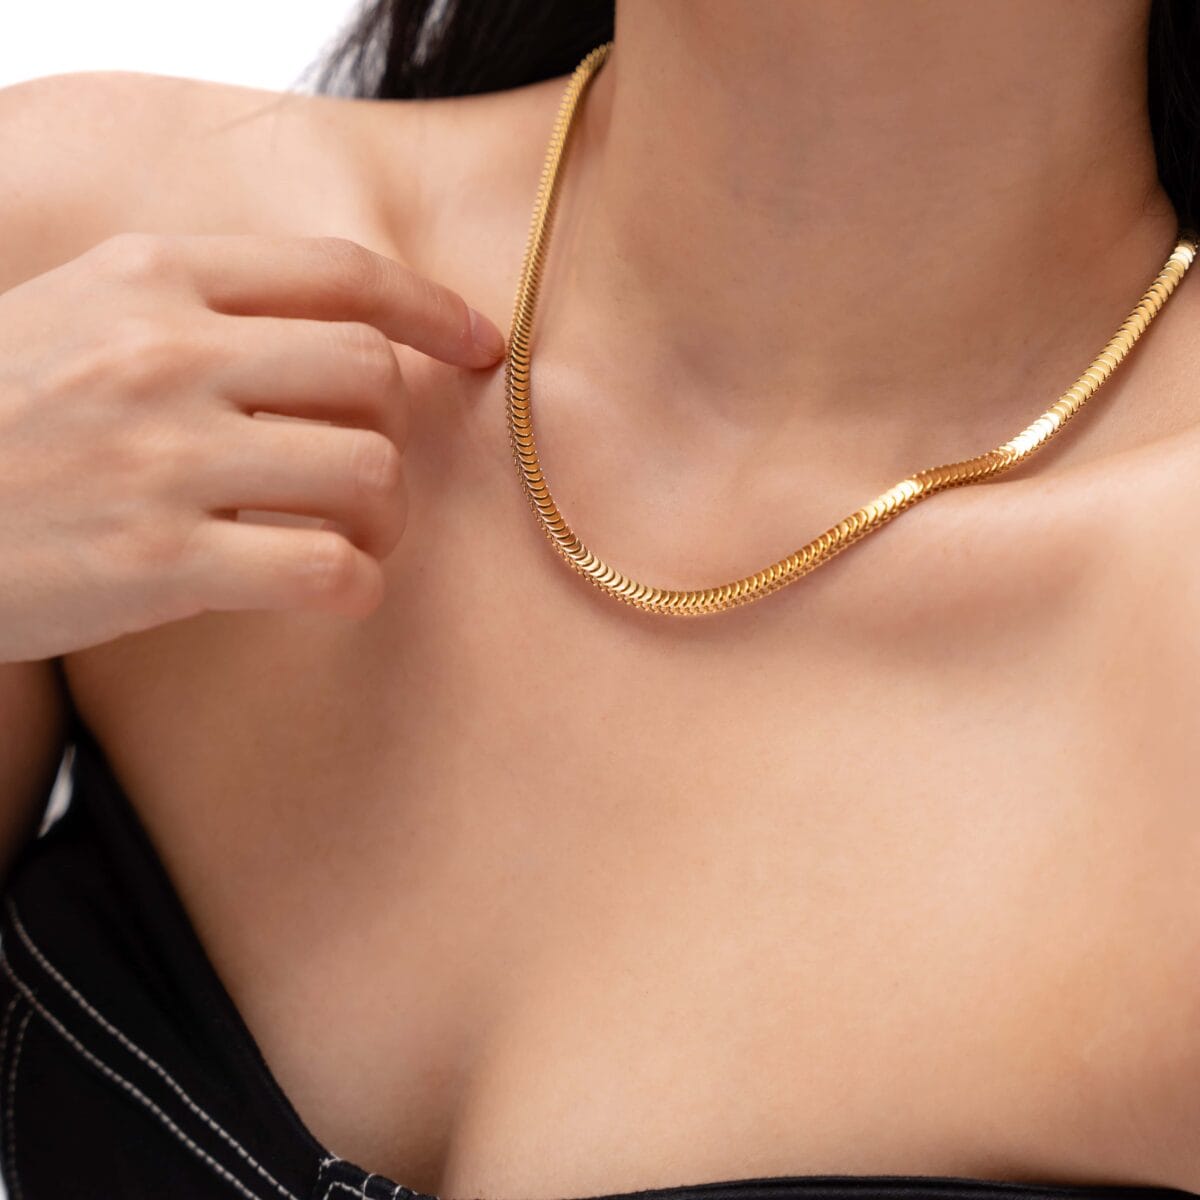 https://m.clubbella.co/product/gold-pleated-chain-statement-necklace/ DSC09351